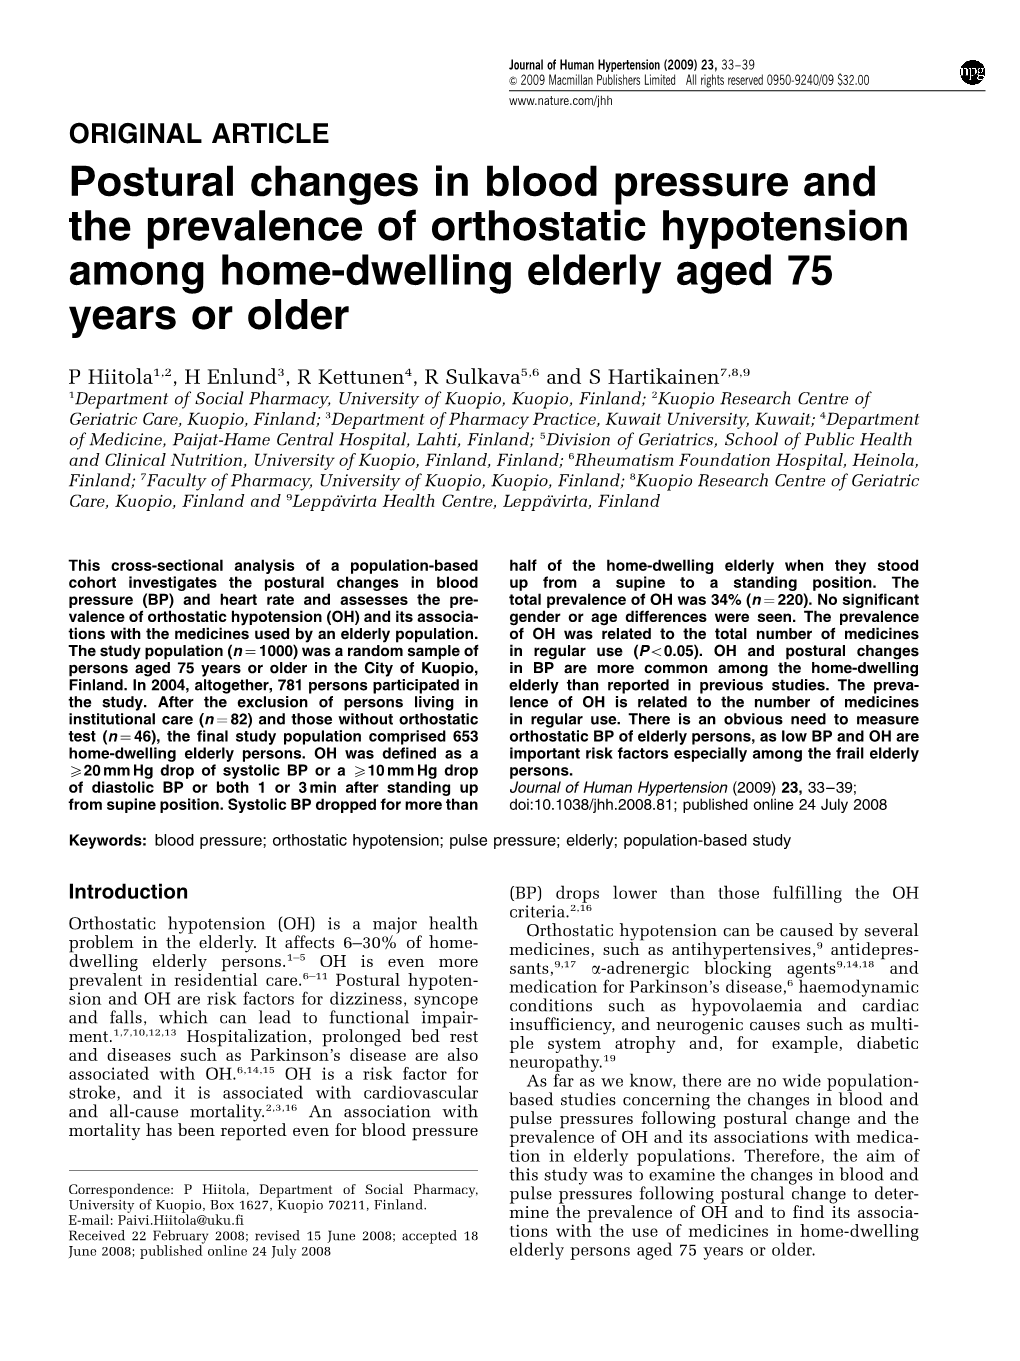 Postural Changes in Blood Pressure and the Prevalence of Orthostatic Hypotension Among Home-Dwelling Elderly Aged 75 Years Or Older